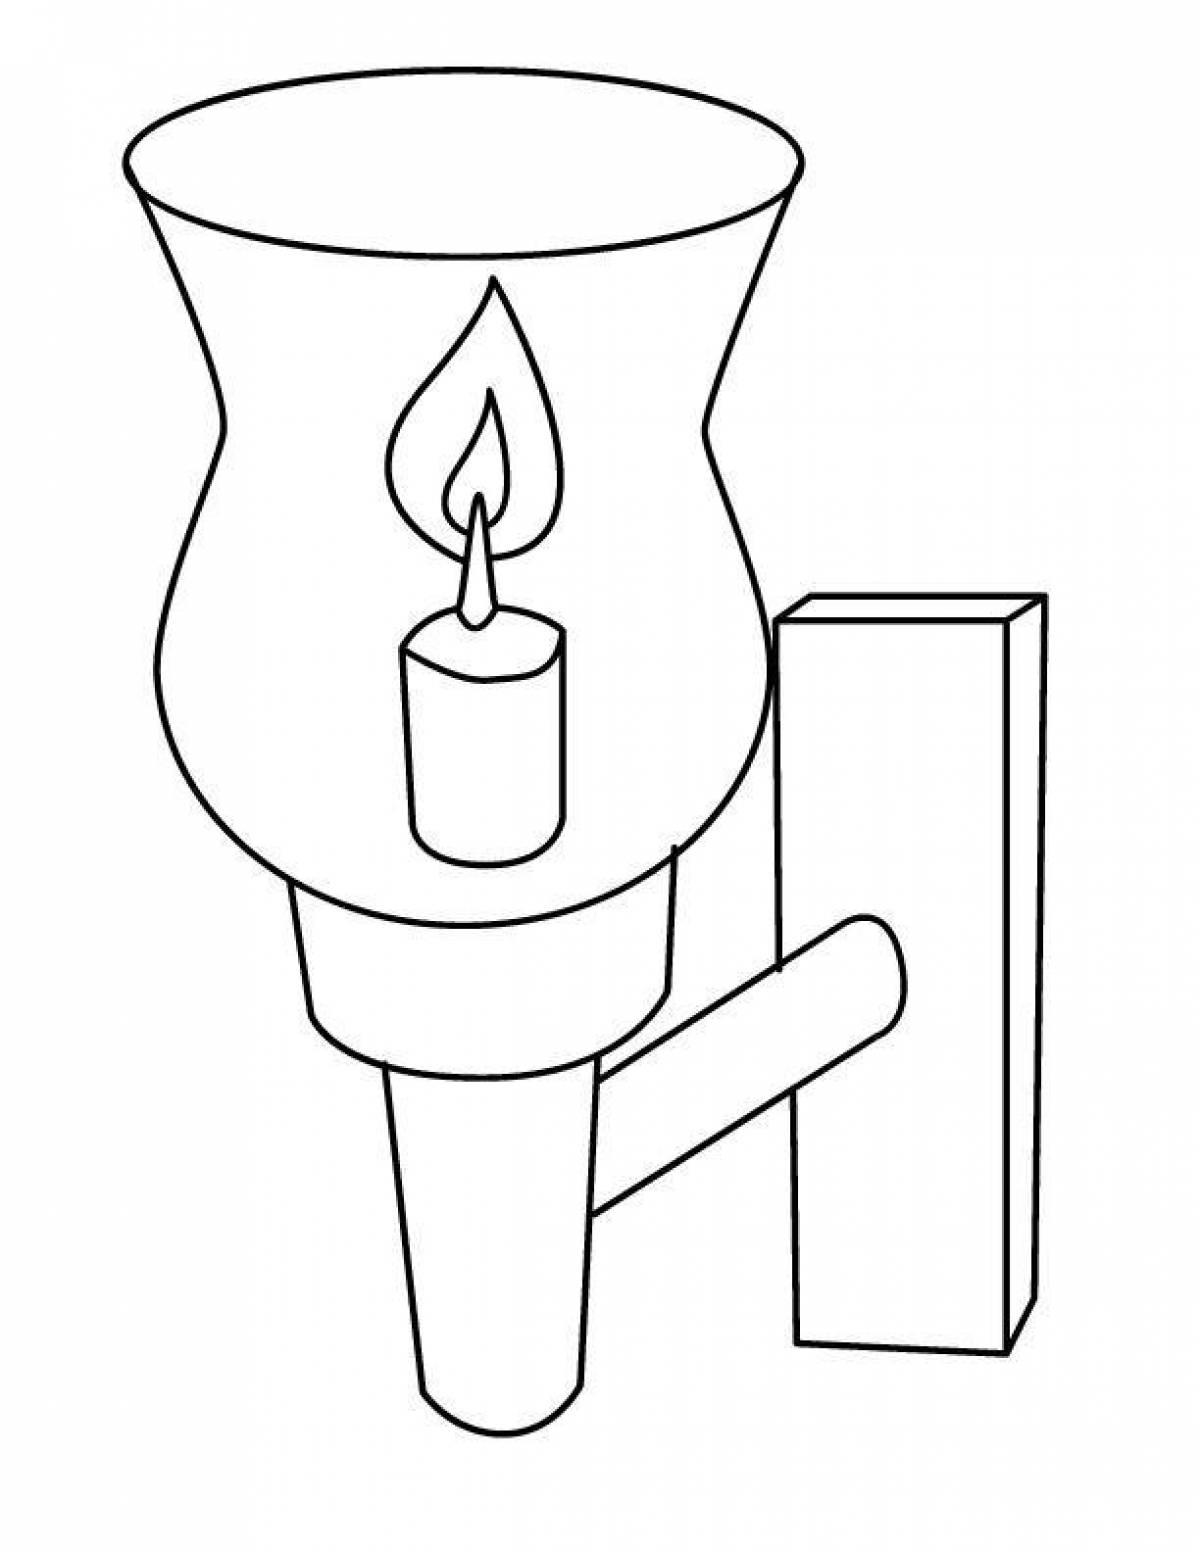 Glowing lamp coloring page